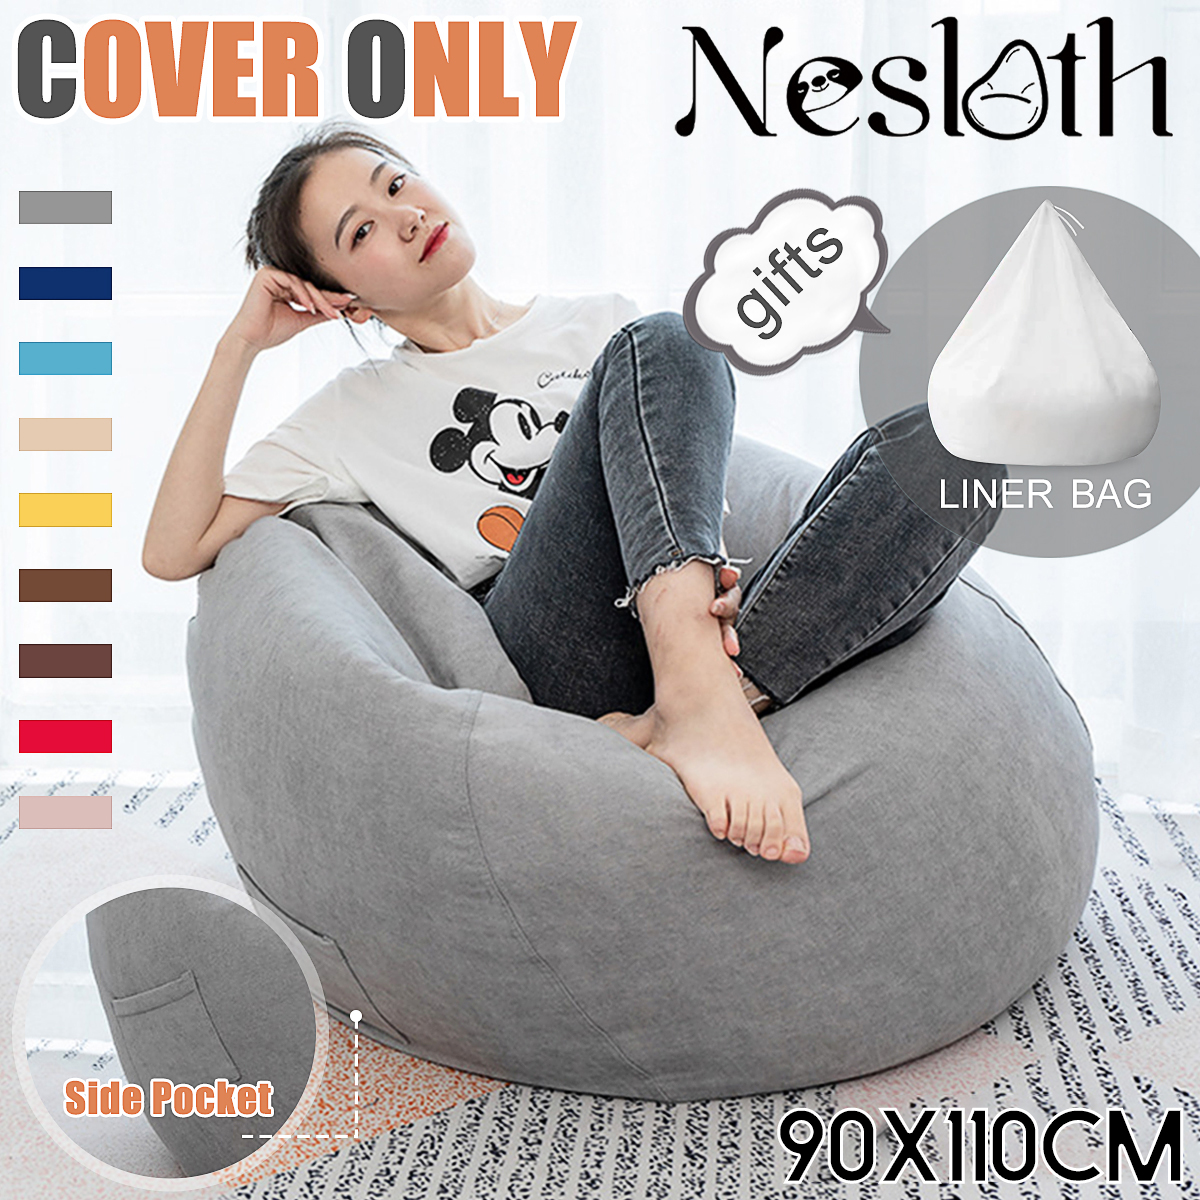 NESLOTH 90*110cm Soft Bean Bag Chairs Couch Sofa Cover Indoor Lazy Sofa For Adults 1